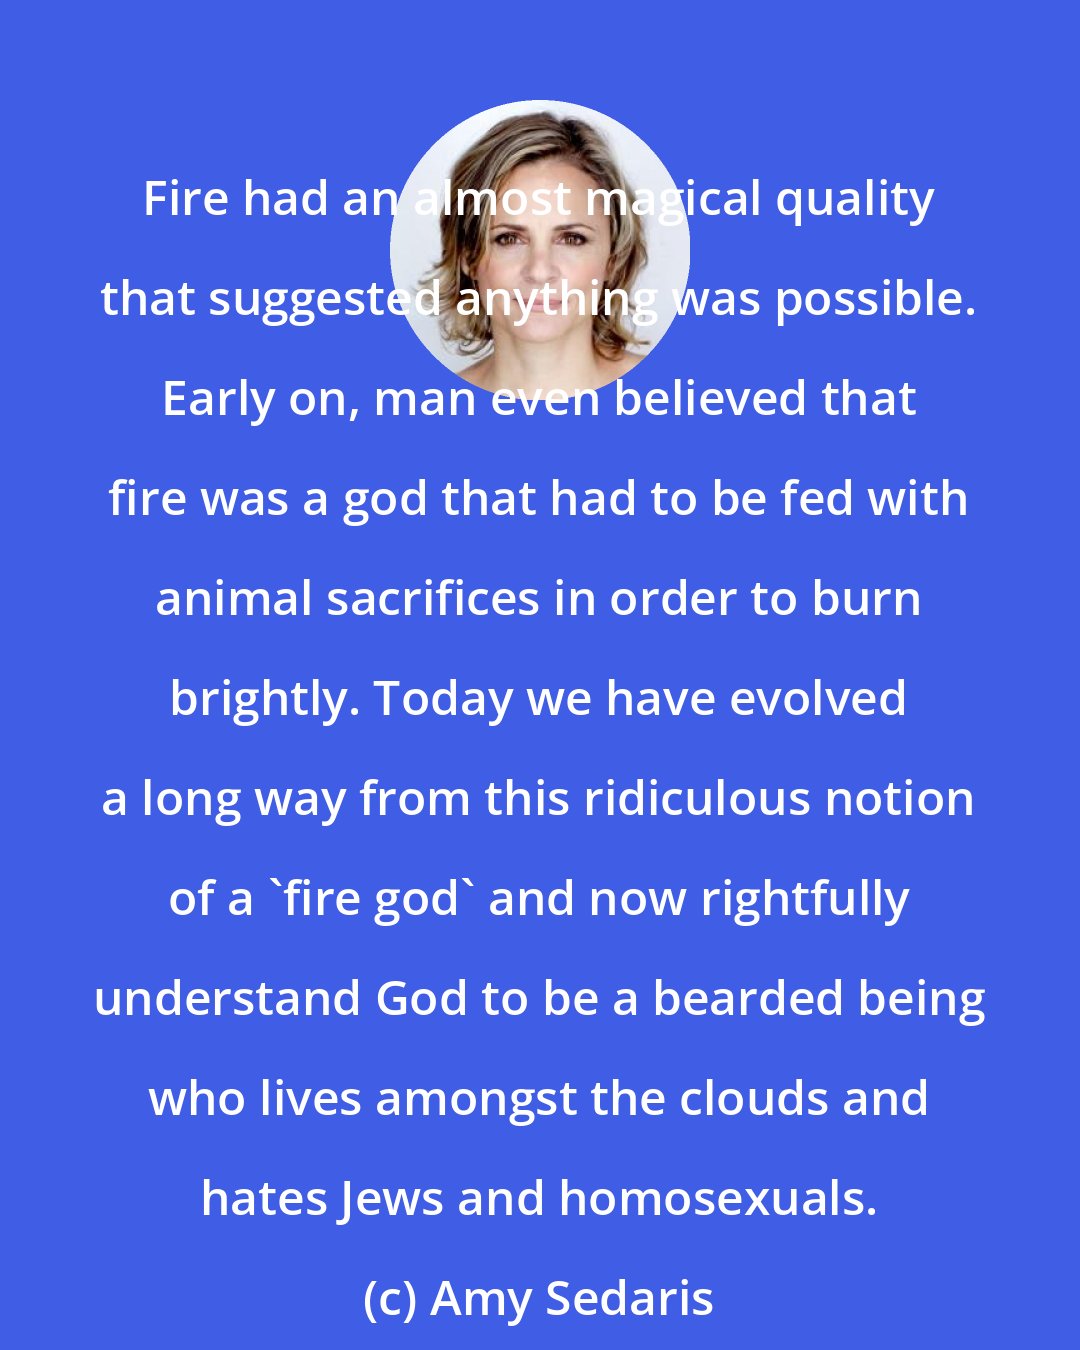 Amy Sedaris: Fire had an almost magical quality that suggested anything was possible. Early on, man even believed that fire was a god that had to be fed with animal sacrifices in order to burn brightly. Today we have evolved a long way from this ridiculous notion of a 'fire god' and now rightfully understand God to be a bearded being who lives amongst the clouds and hates Jews and homosexuals.